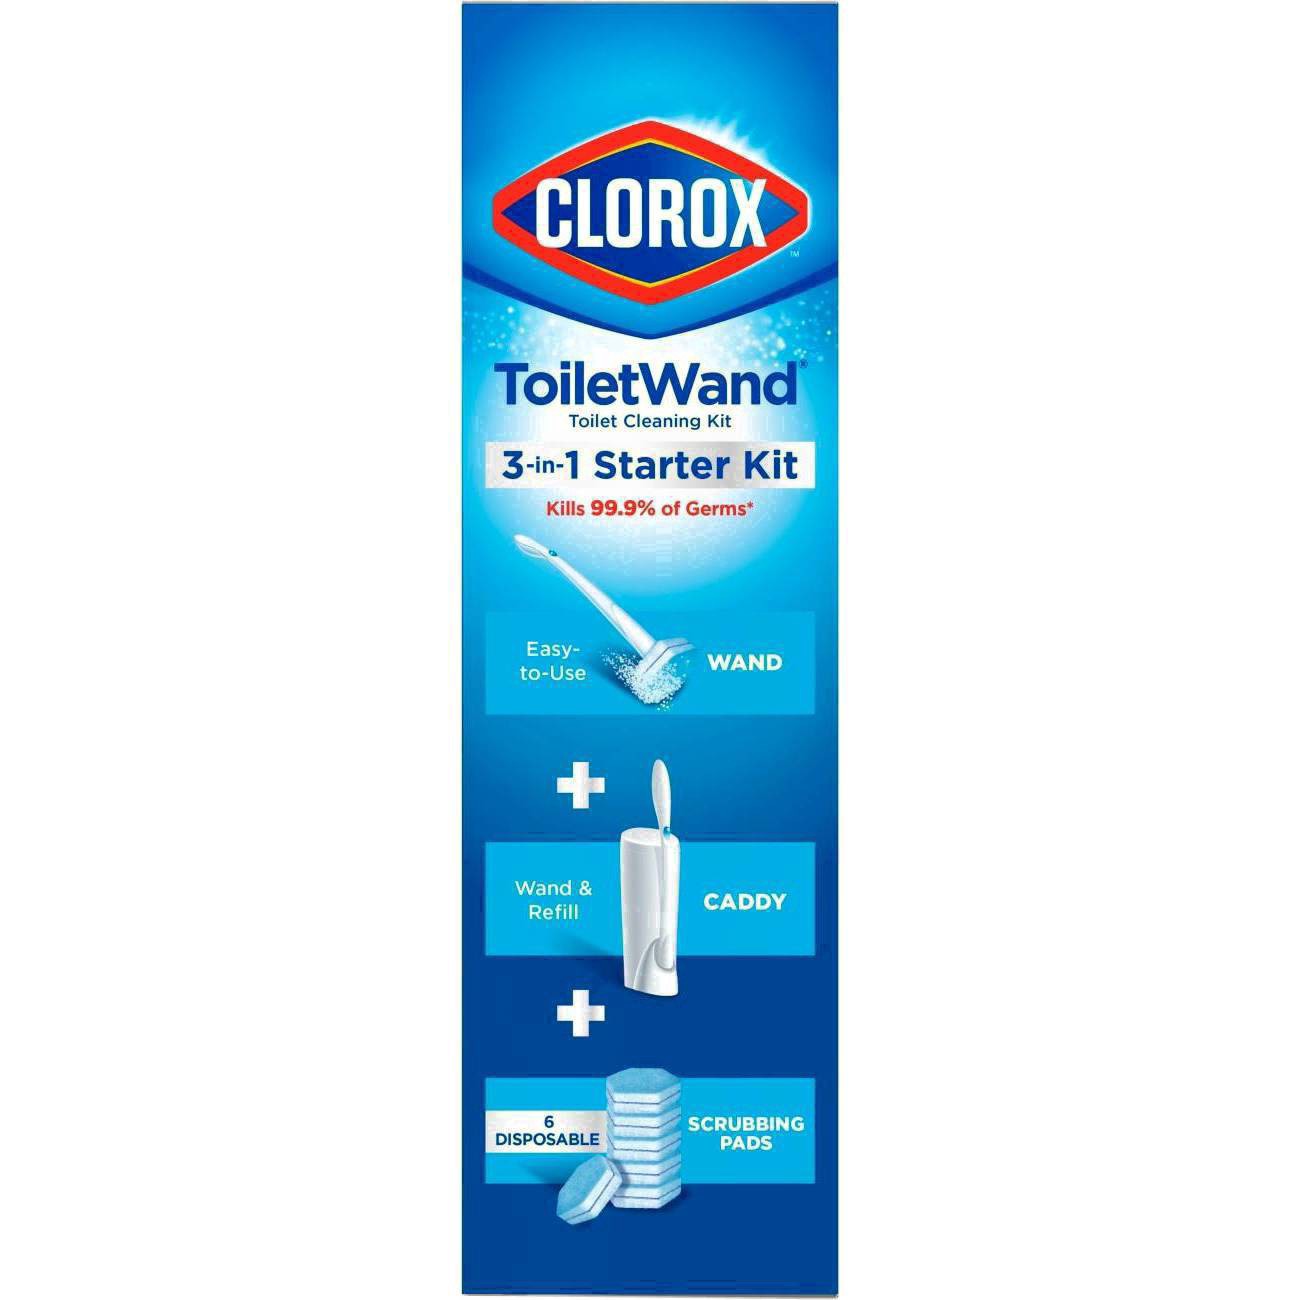 slide 63 of 176, Clorox Toilet Wand 3-in-1 Starter Toliet Cleaning Kit, 1 ct